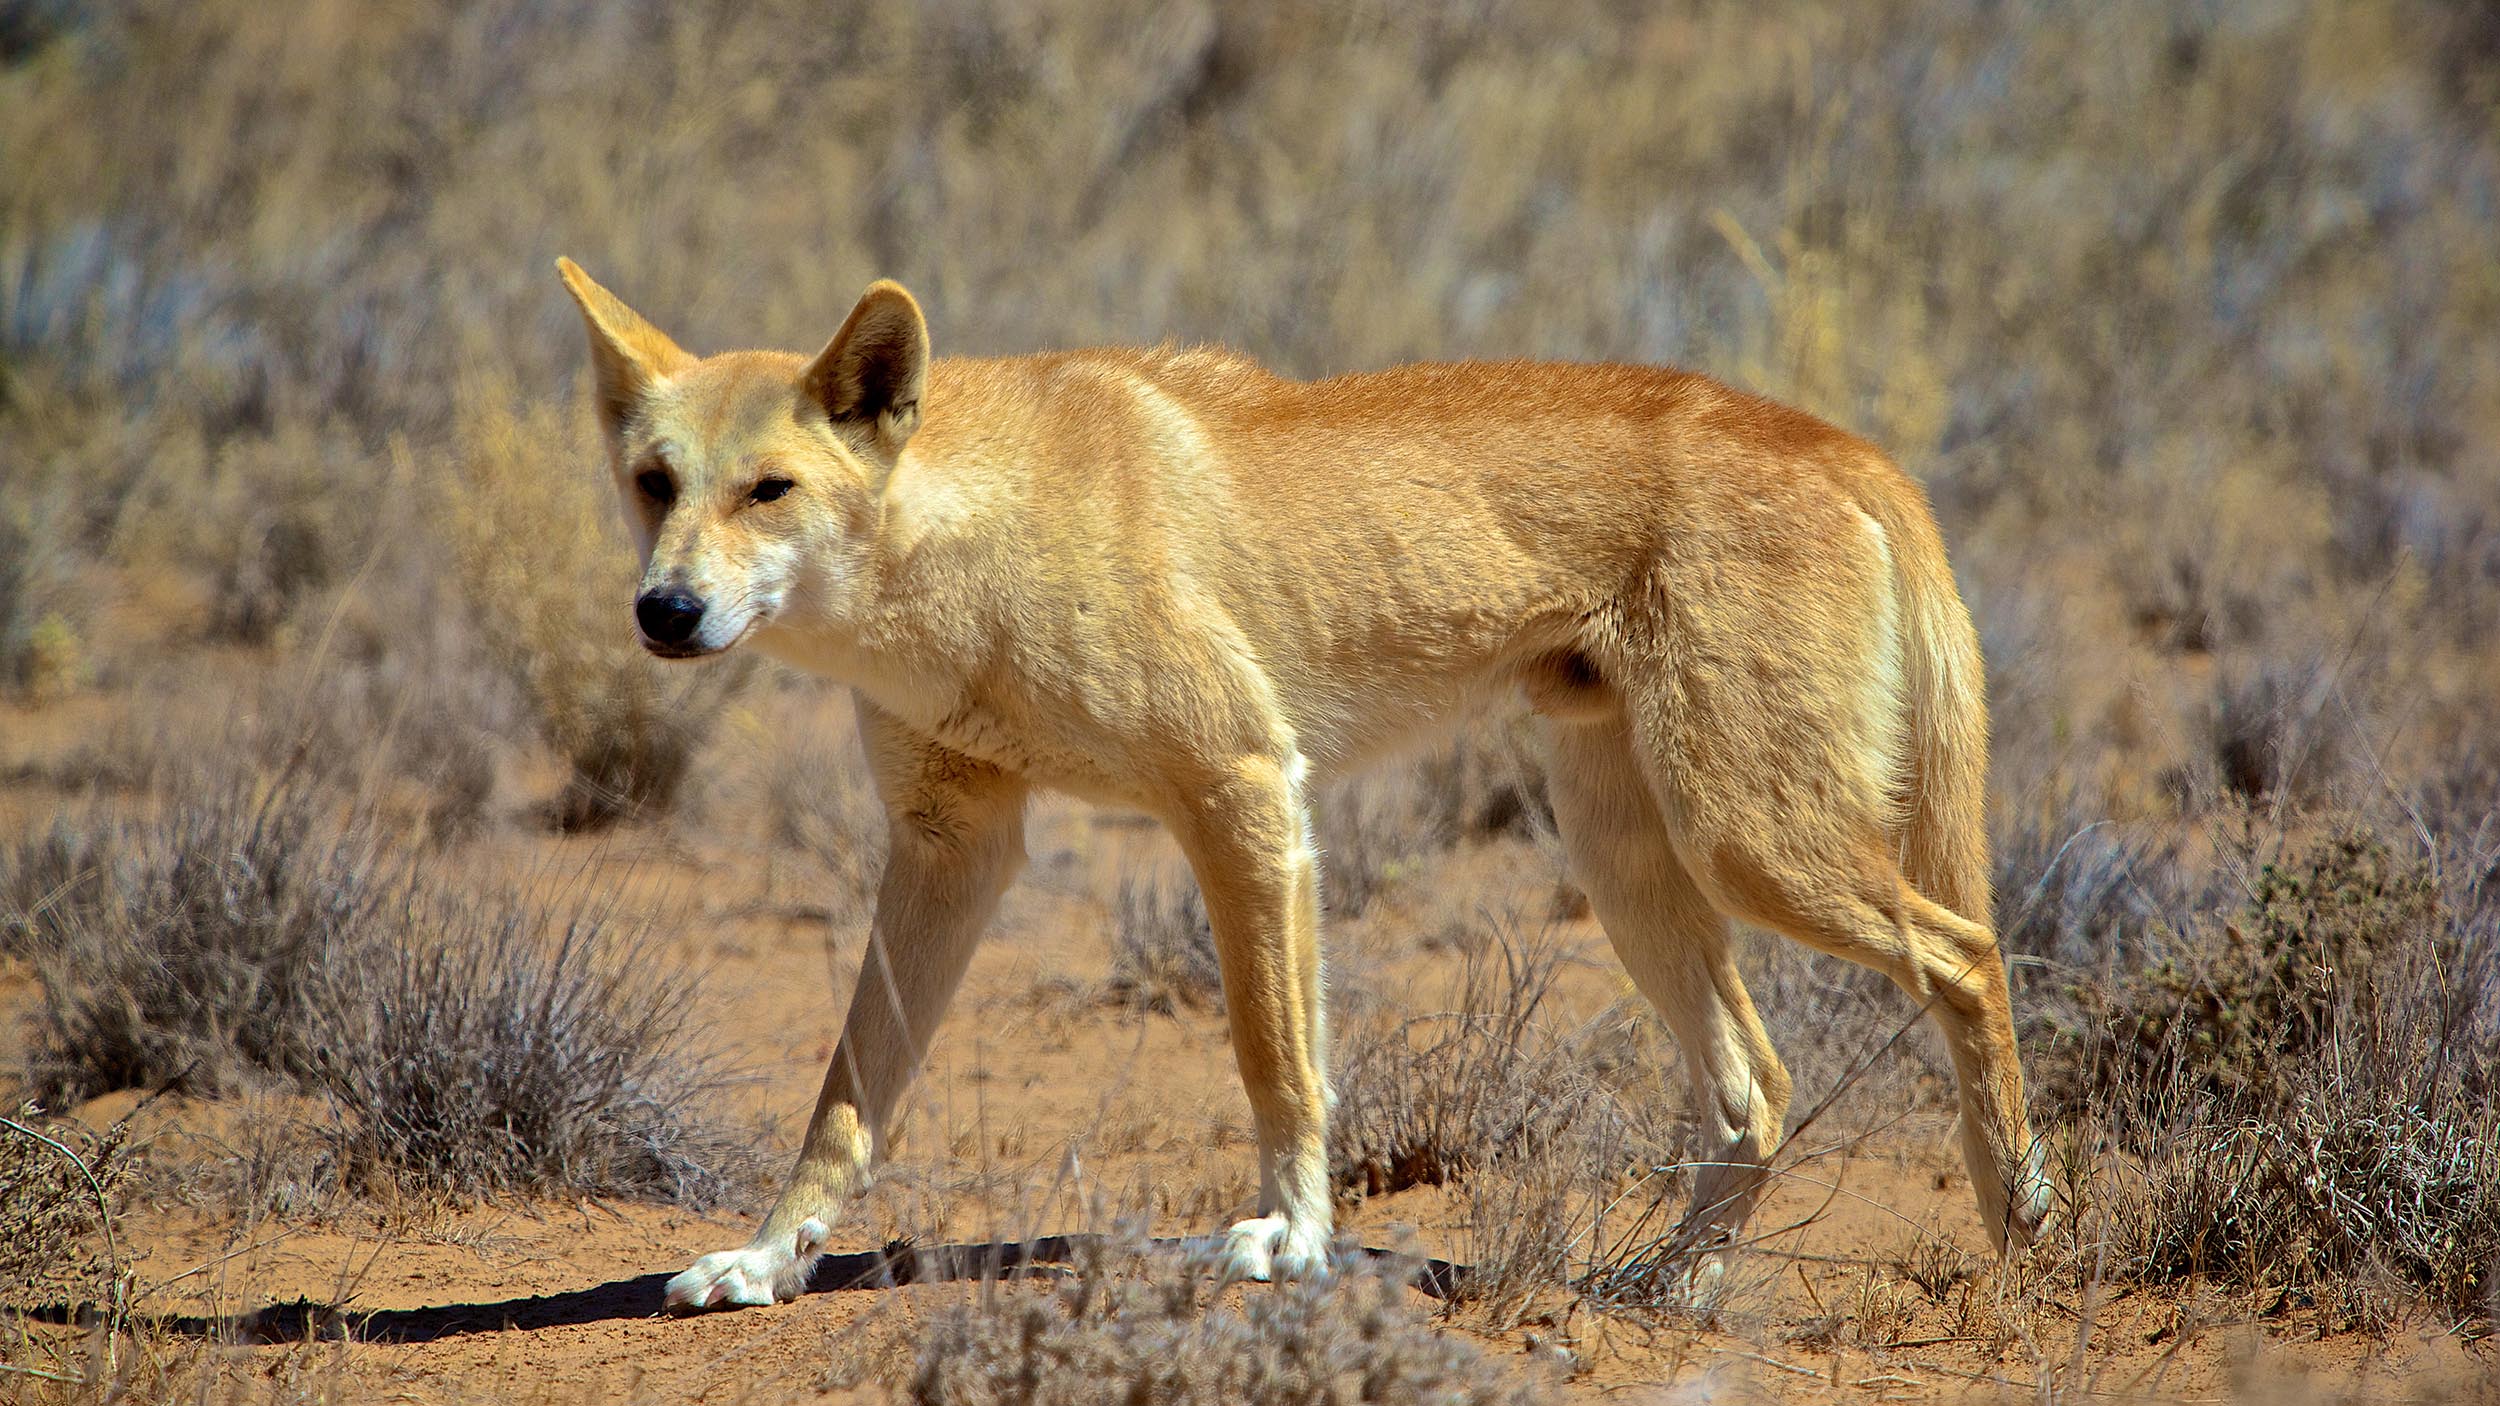 The Dingo is an important native predator, helping to control feral animals such as cats and goats in the Outback. This dingo was photographed in the Strzelecki Desert, central Australia.